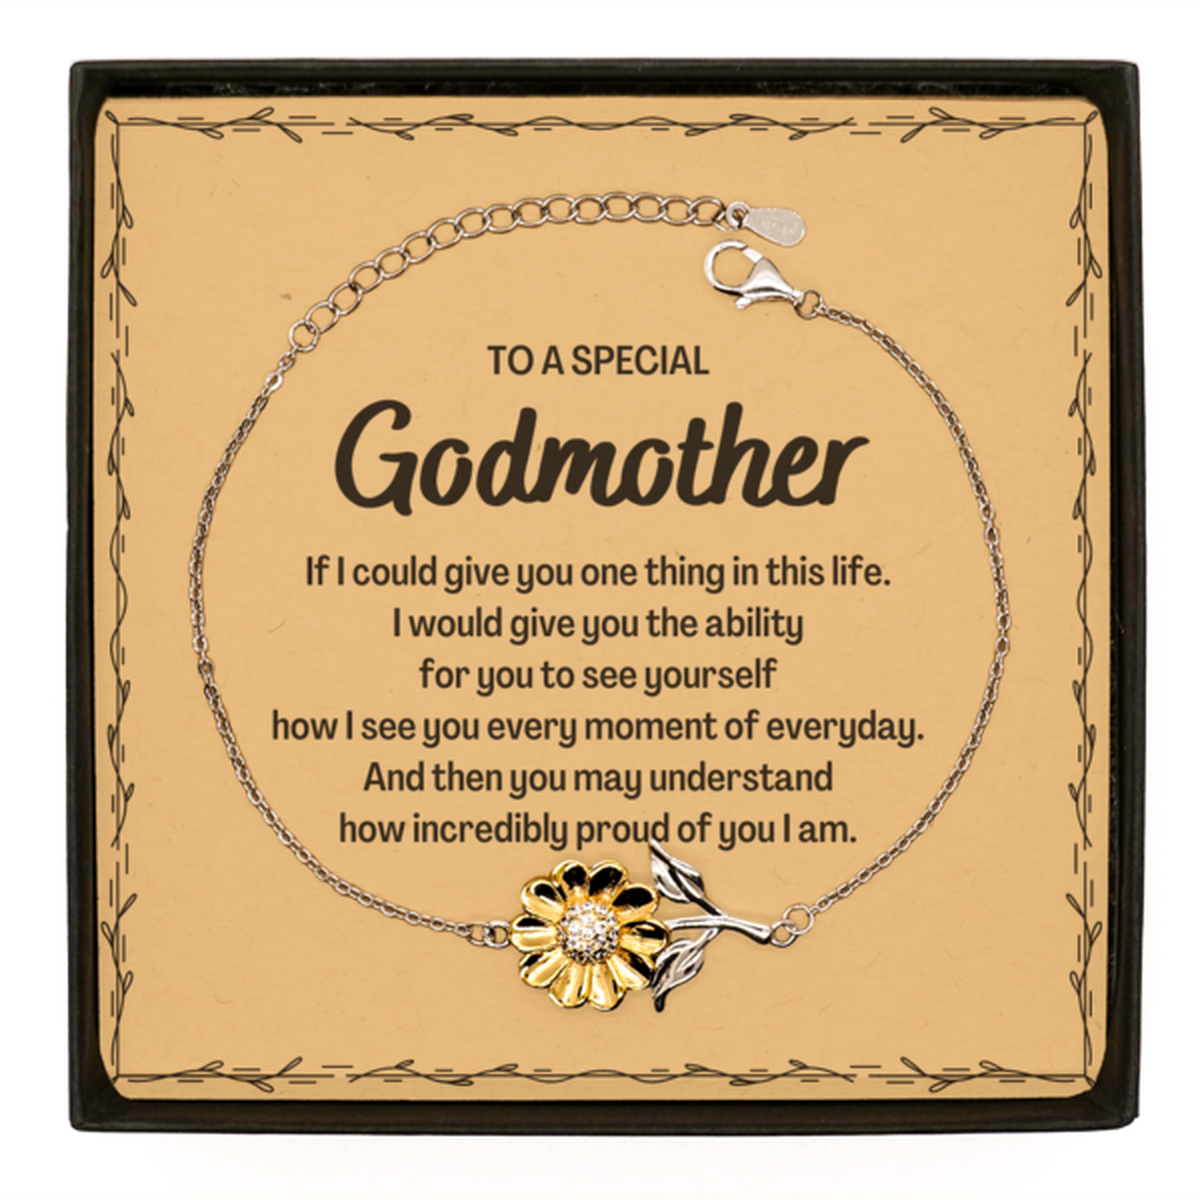 To My Godmother Sunflower Bracelet, Gifts For Godmother Message Card, Inspirational Gifts for Christmas Birthday, Epic Gifts for Godmother To A Special Godmother how incredibly proud of you I am